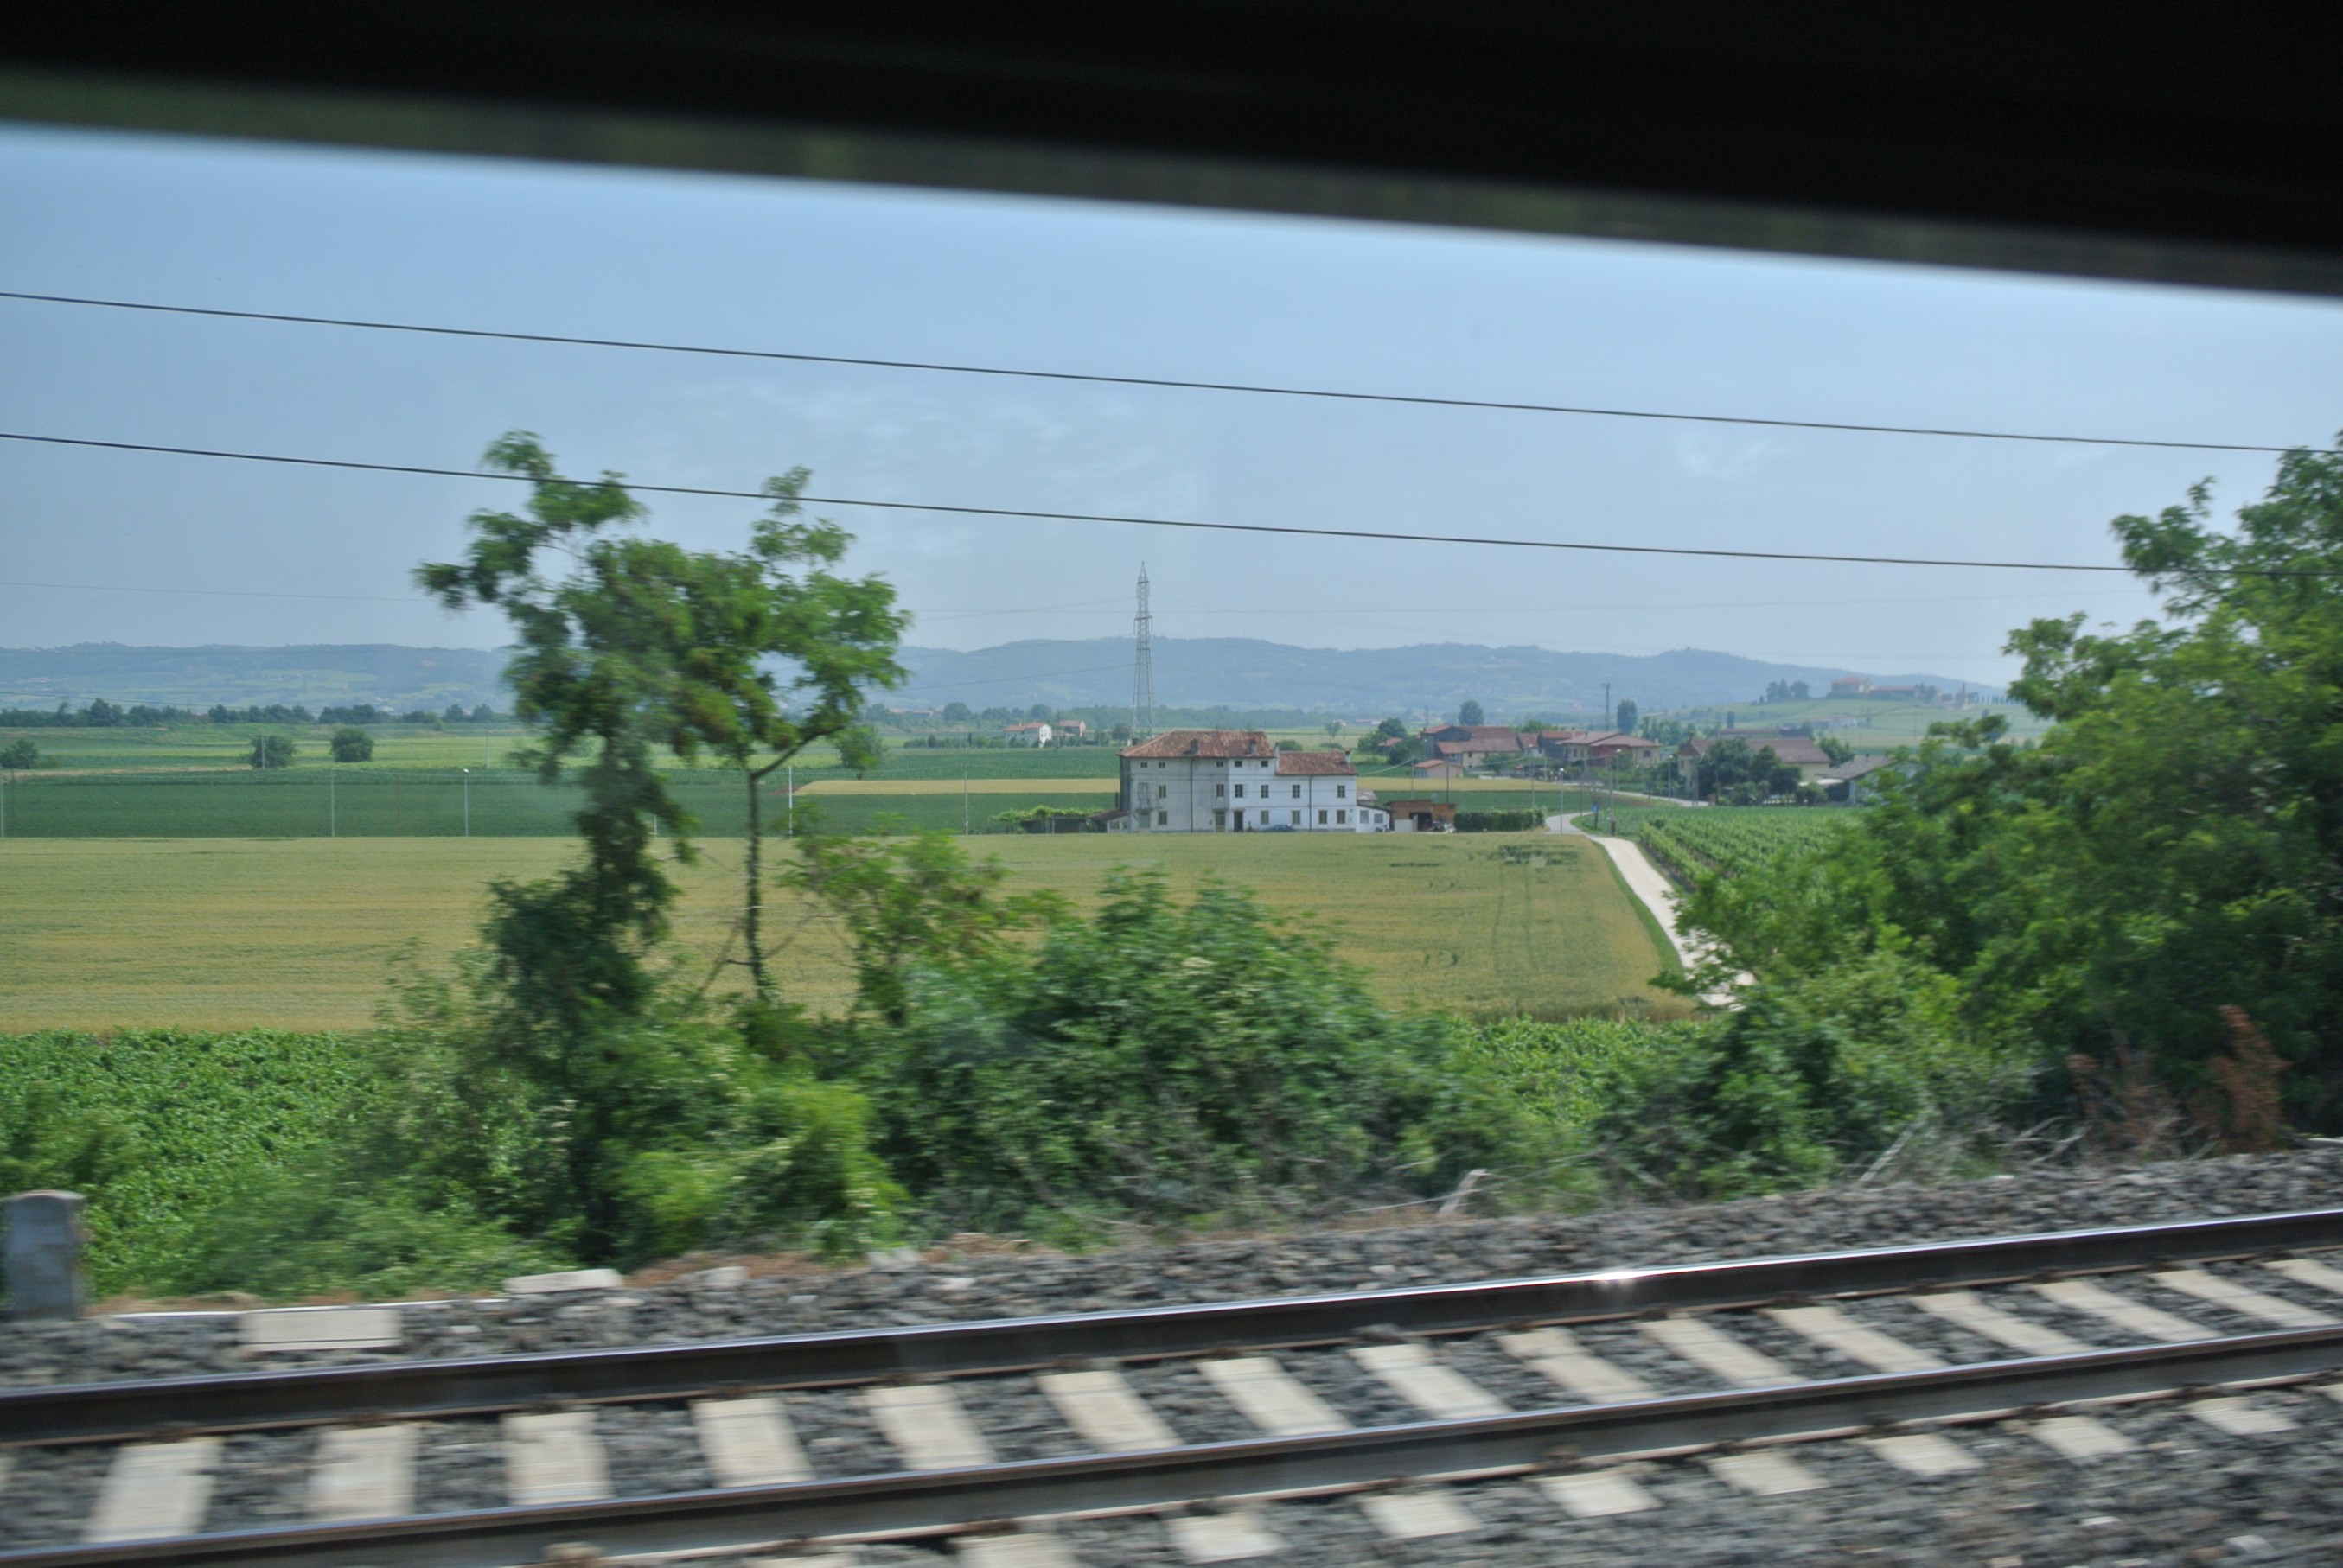 A view from the train.